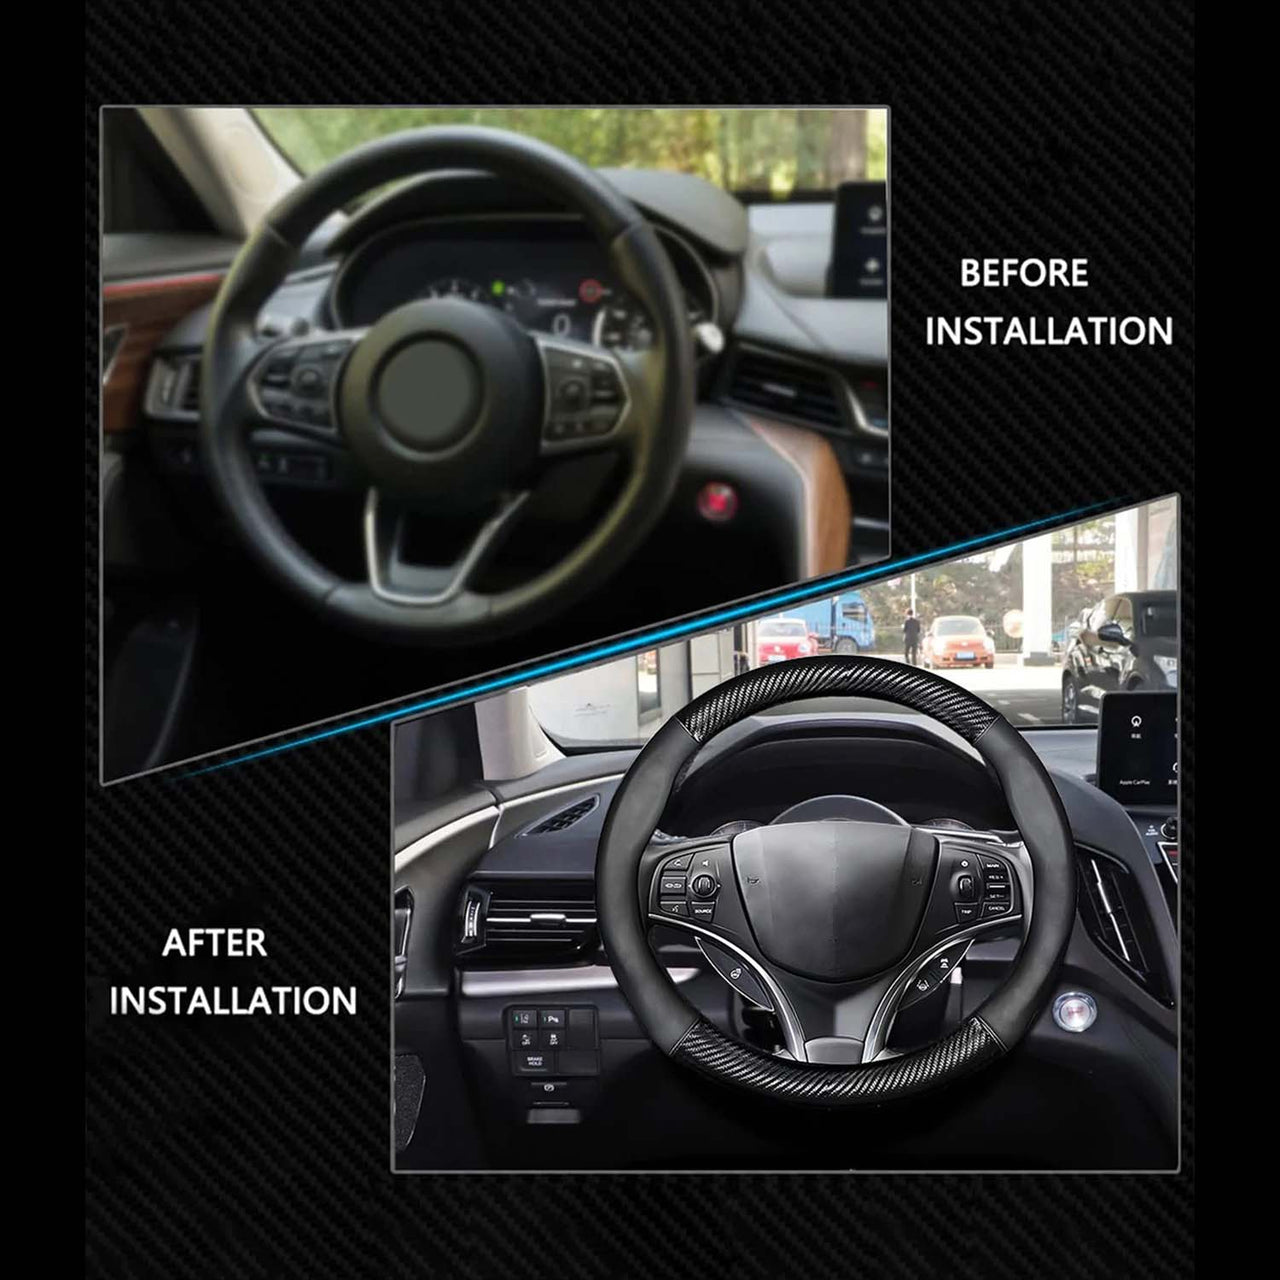 Car Steering Wheel Cover, Custom Fit For Your Cars, Leather Nonslip 3D Carbon Fiber Texture Sport Style Wheel Cover for Women, Interior Modification for All Car Accessories TY18992